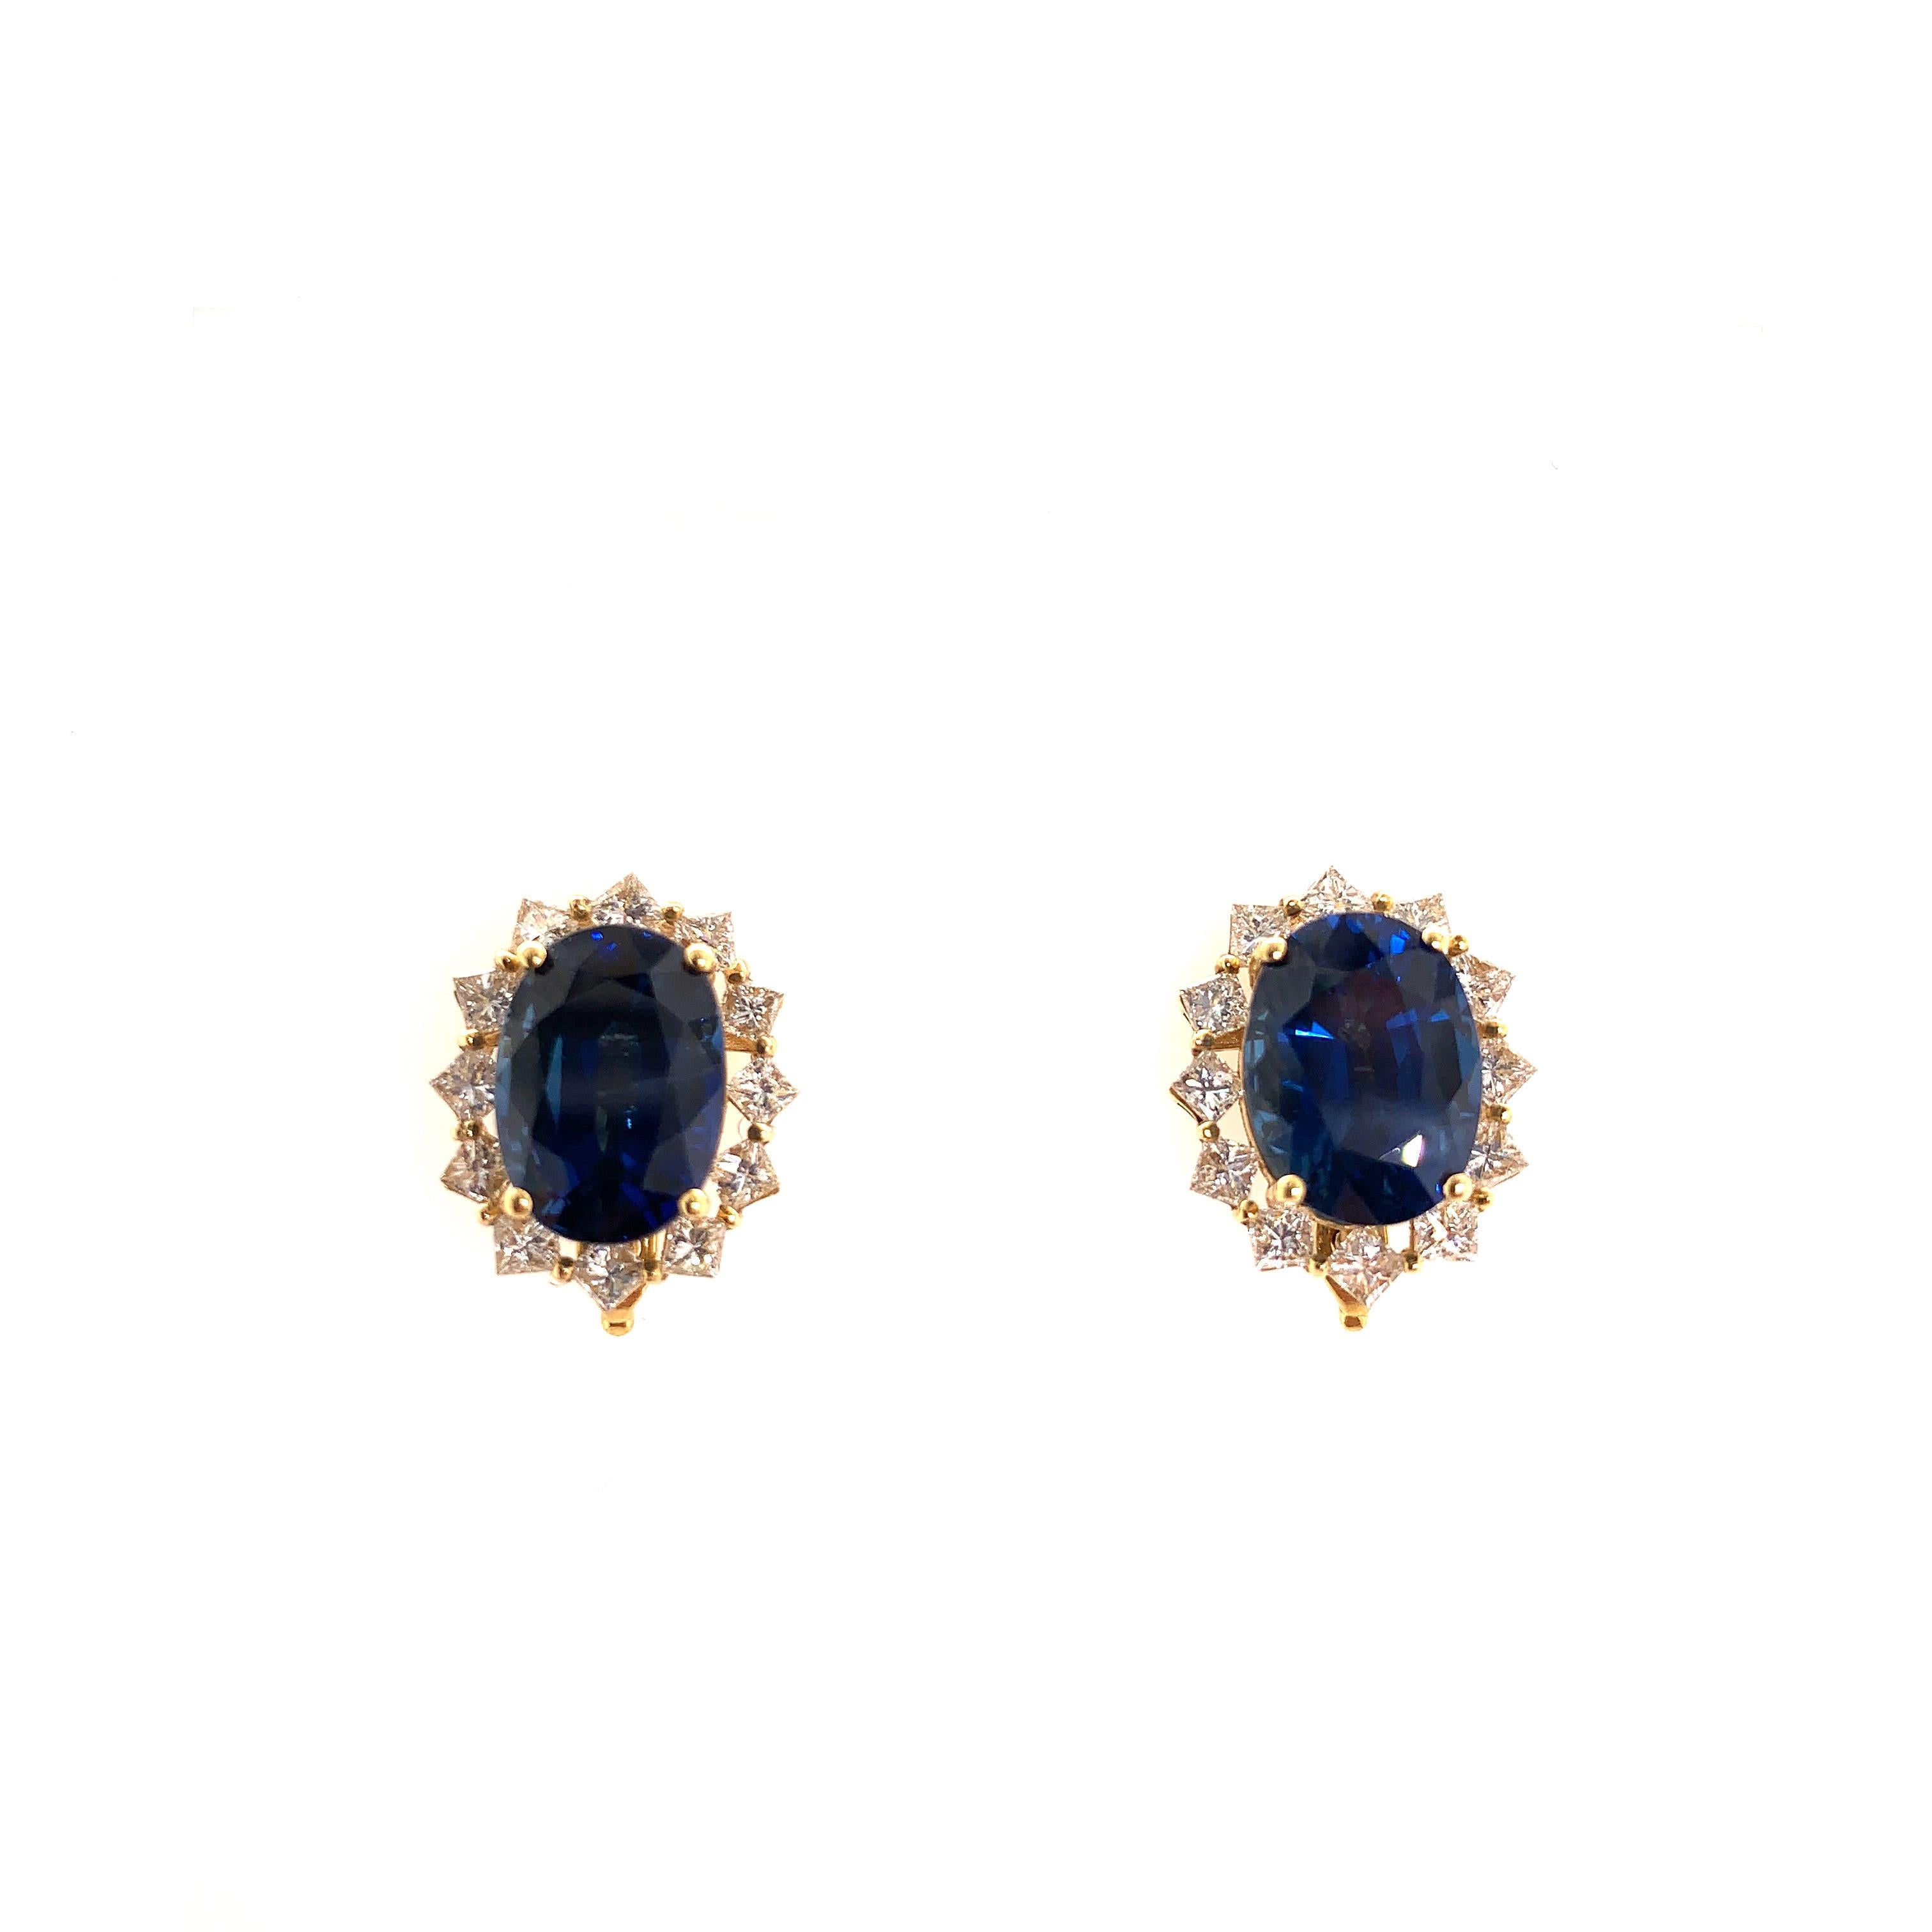 Oval Cut Emerald, Blue Sapphire and Rubelite Earring in 18 Karat Gold with Diamonds